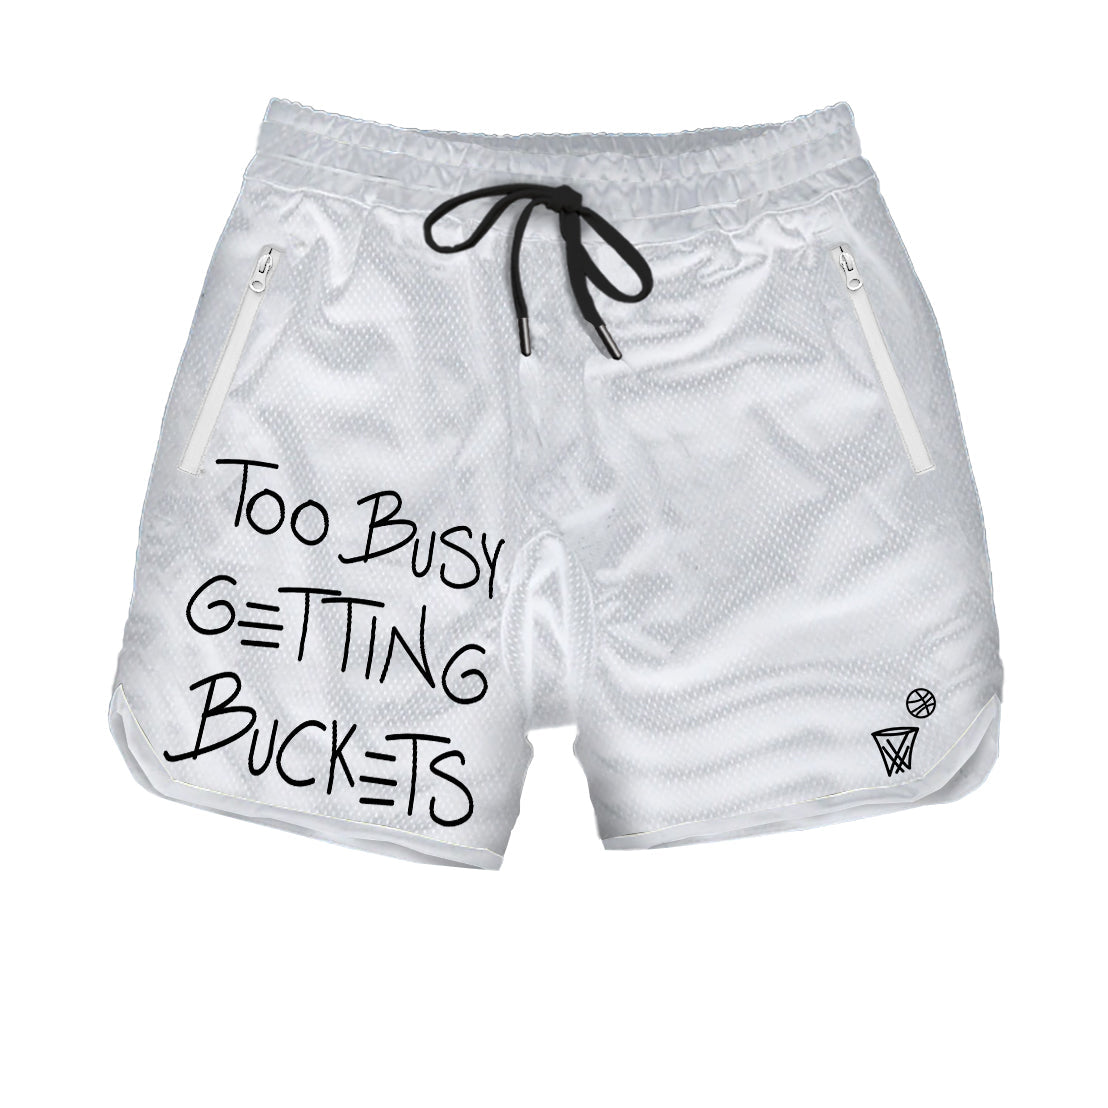 Too Busy Getting Buckets Shorts - Youth - White